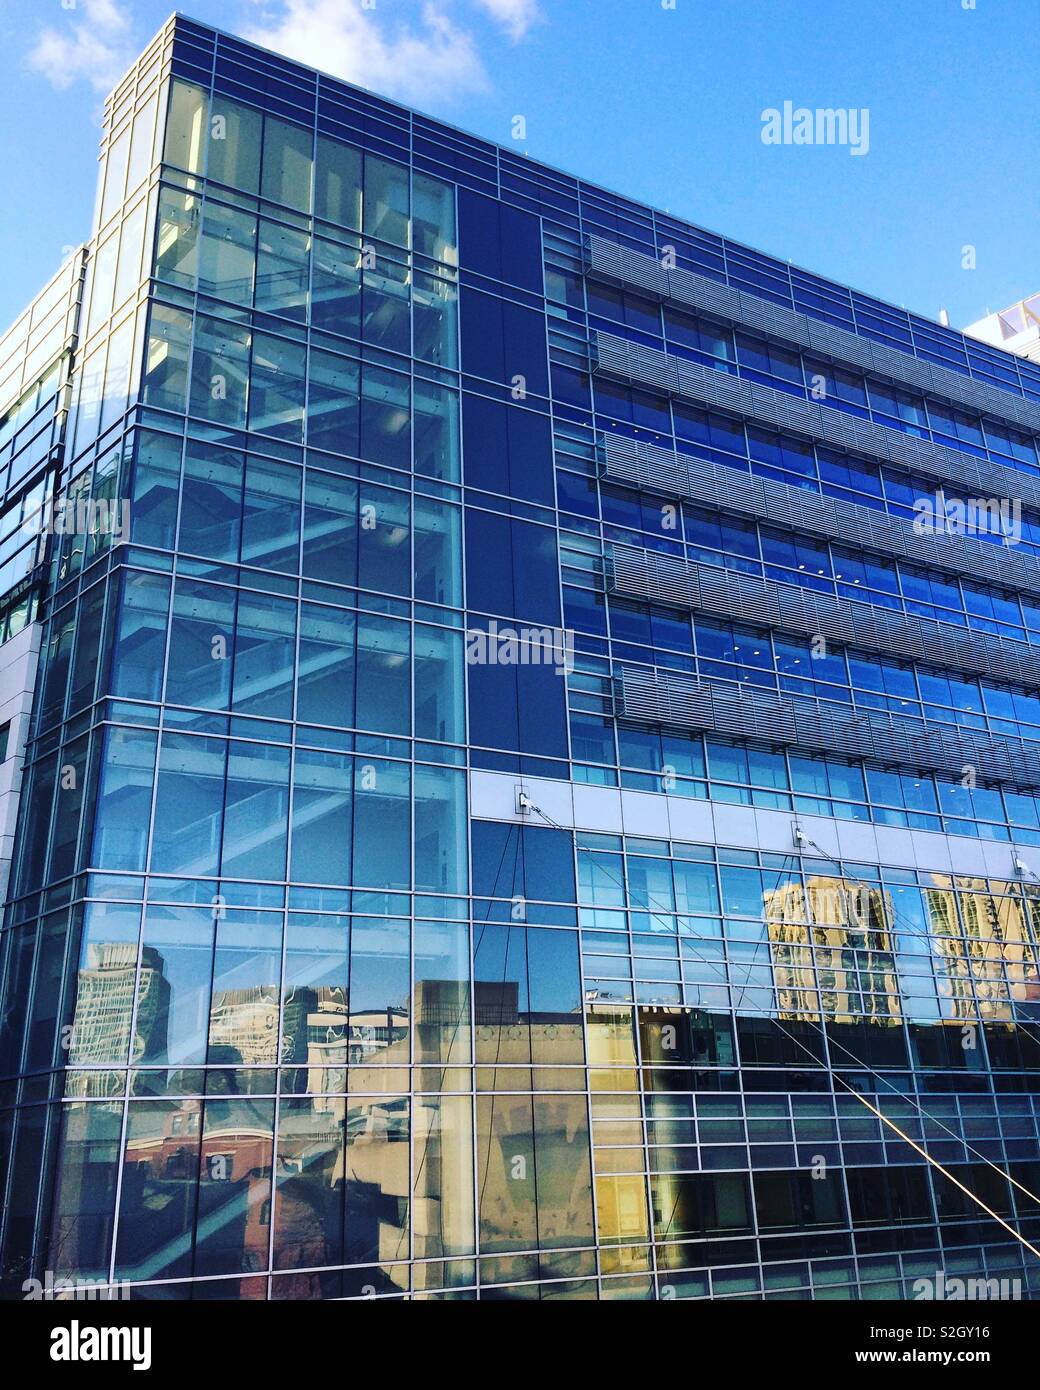 Reflections on the facade of the Yawkey Center for Outpatient Care, Massachusetts General Hospital, Boston, Massachusetts, United States Stock Photo